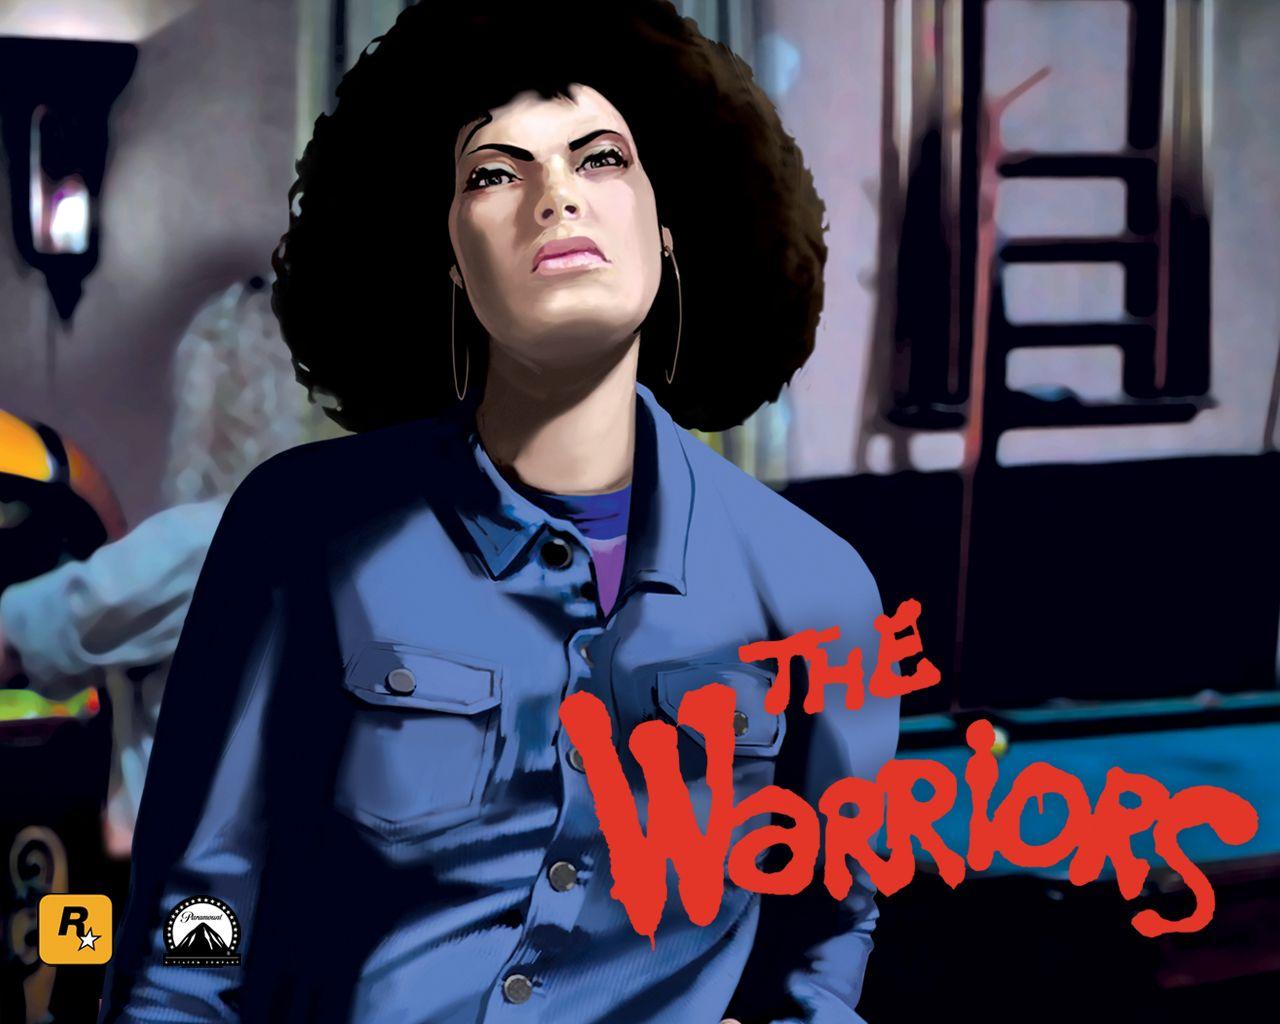 The Warriors wallpaper picture download